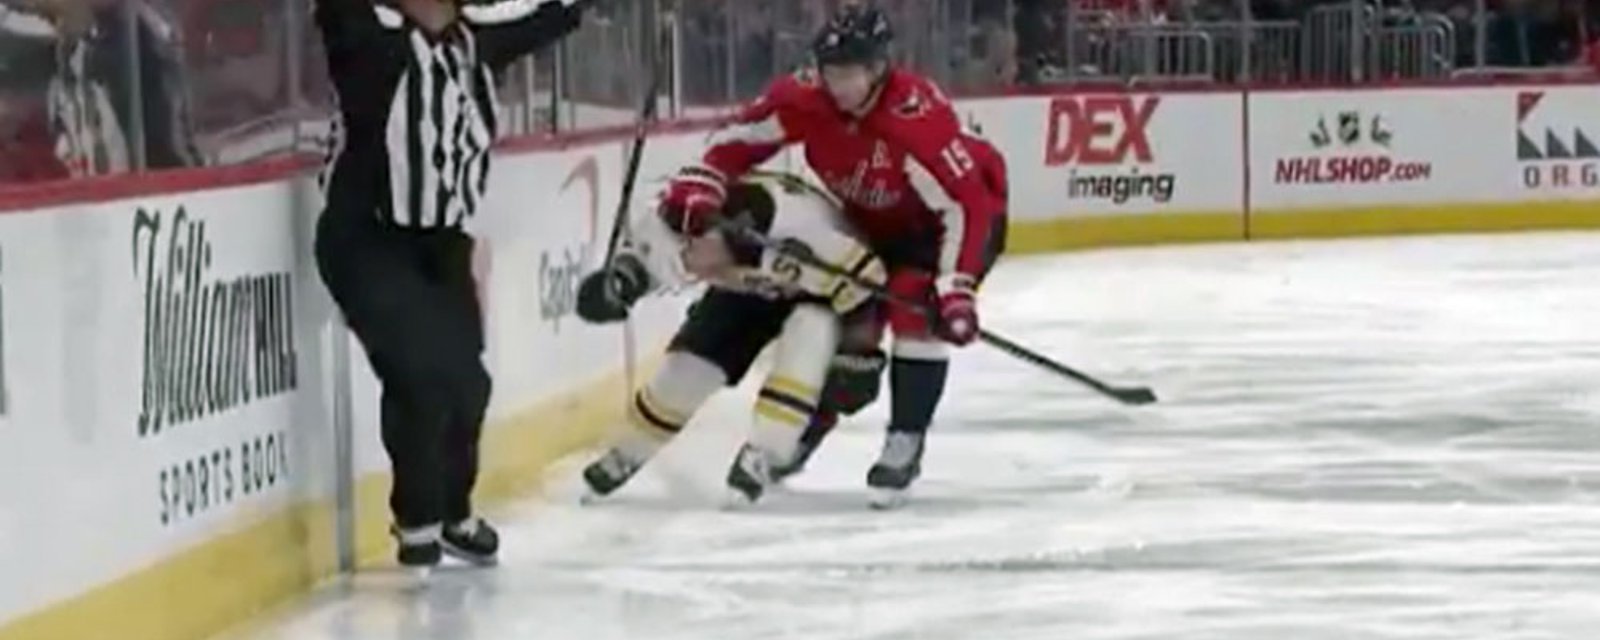 Marchand takes a butt end to the head from Nicklas Backstrom